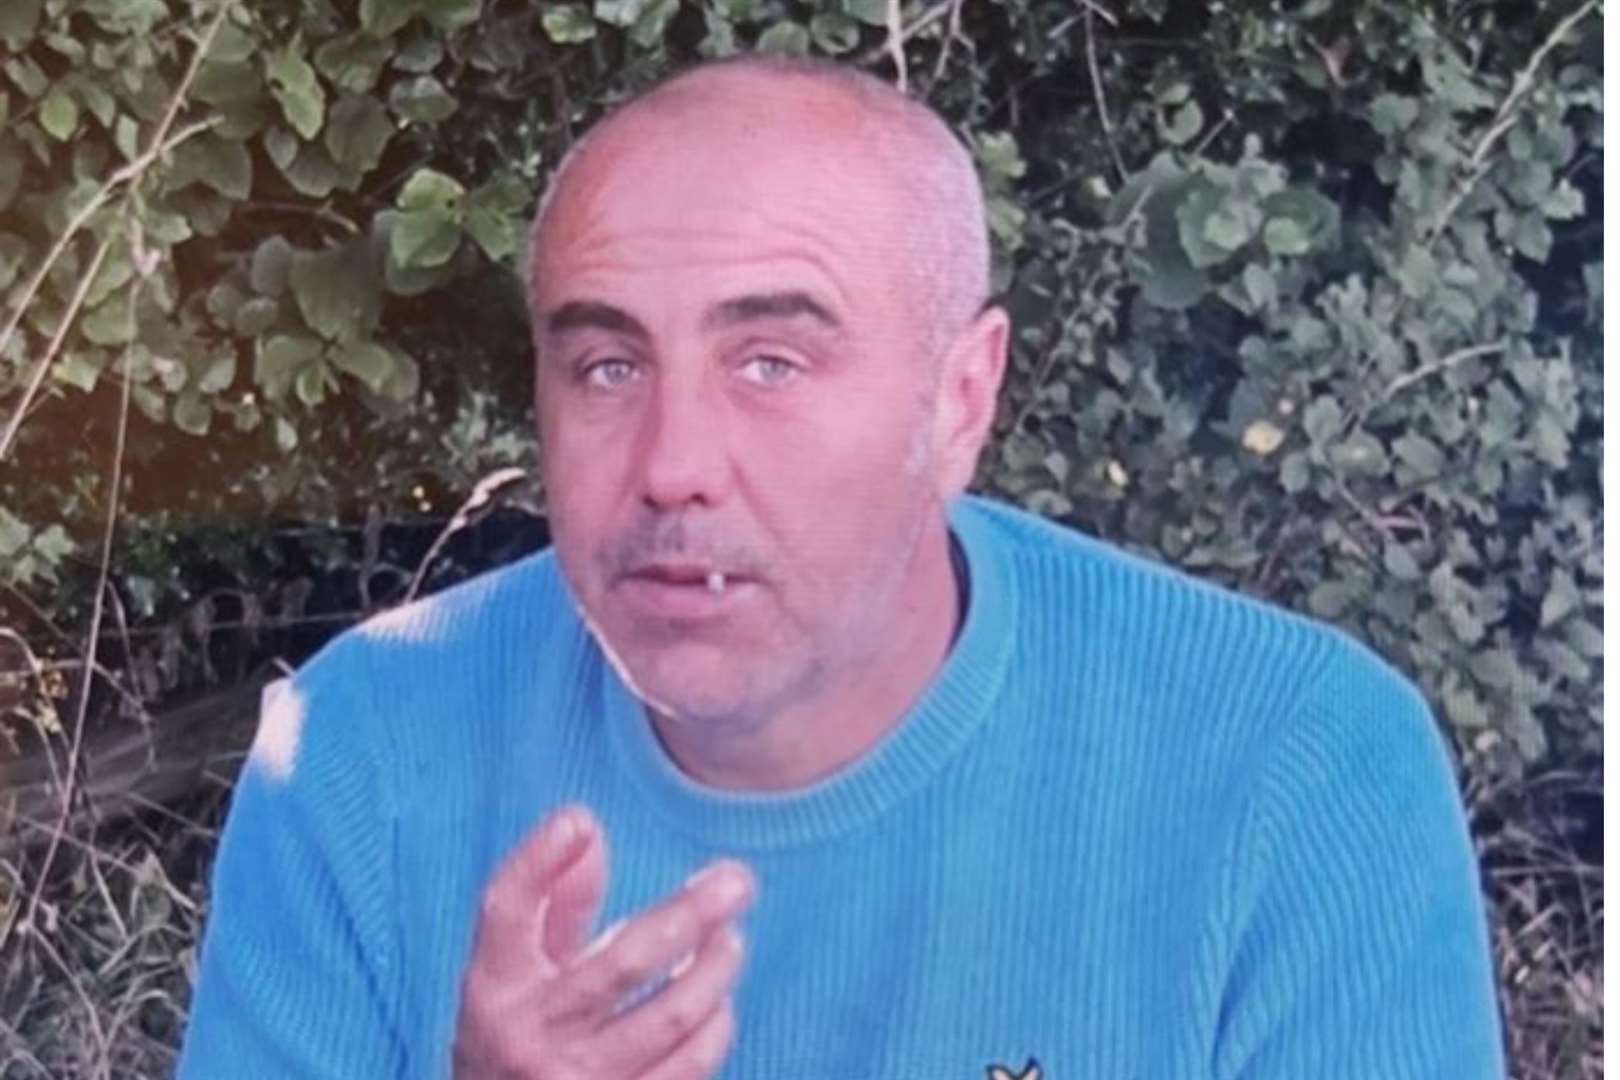 John Macklin has been missing for a week. Photo: Kent Police